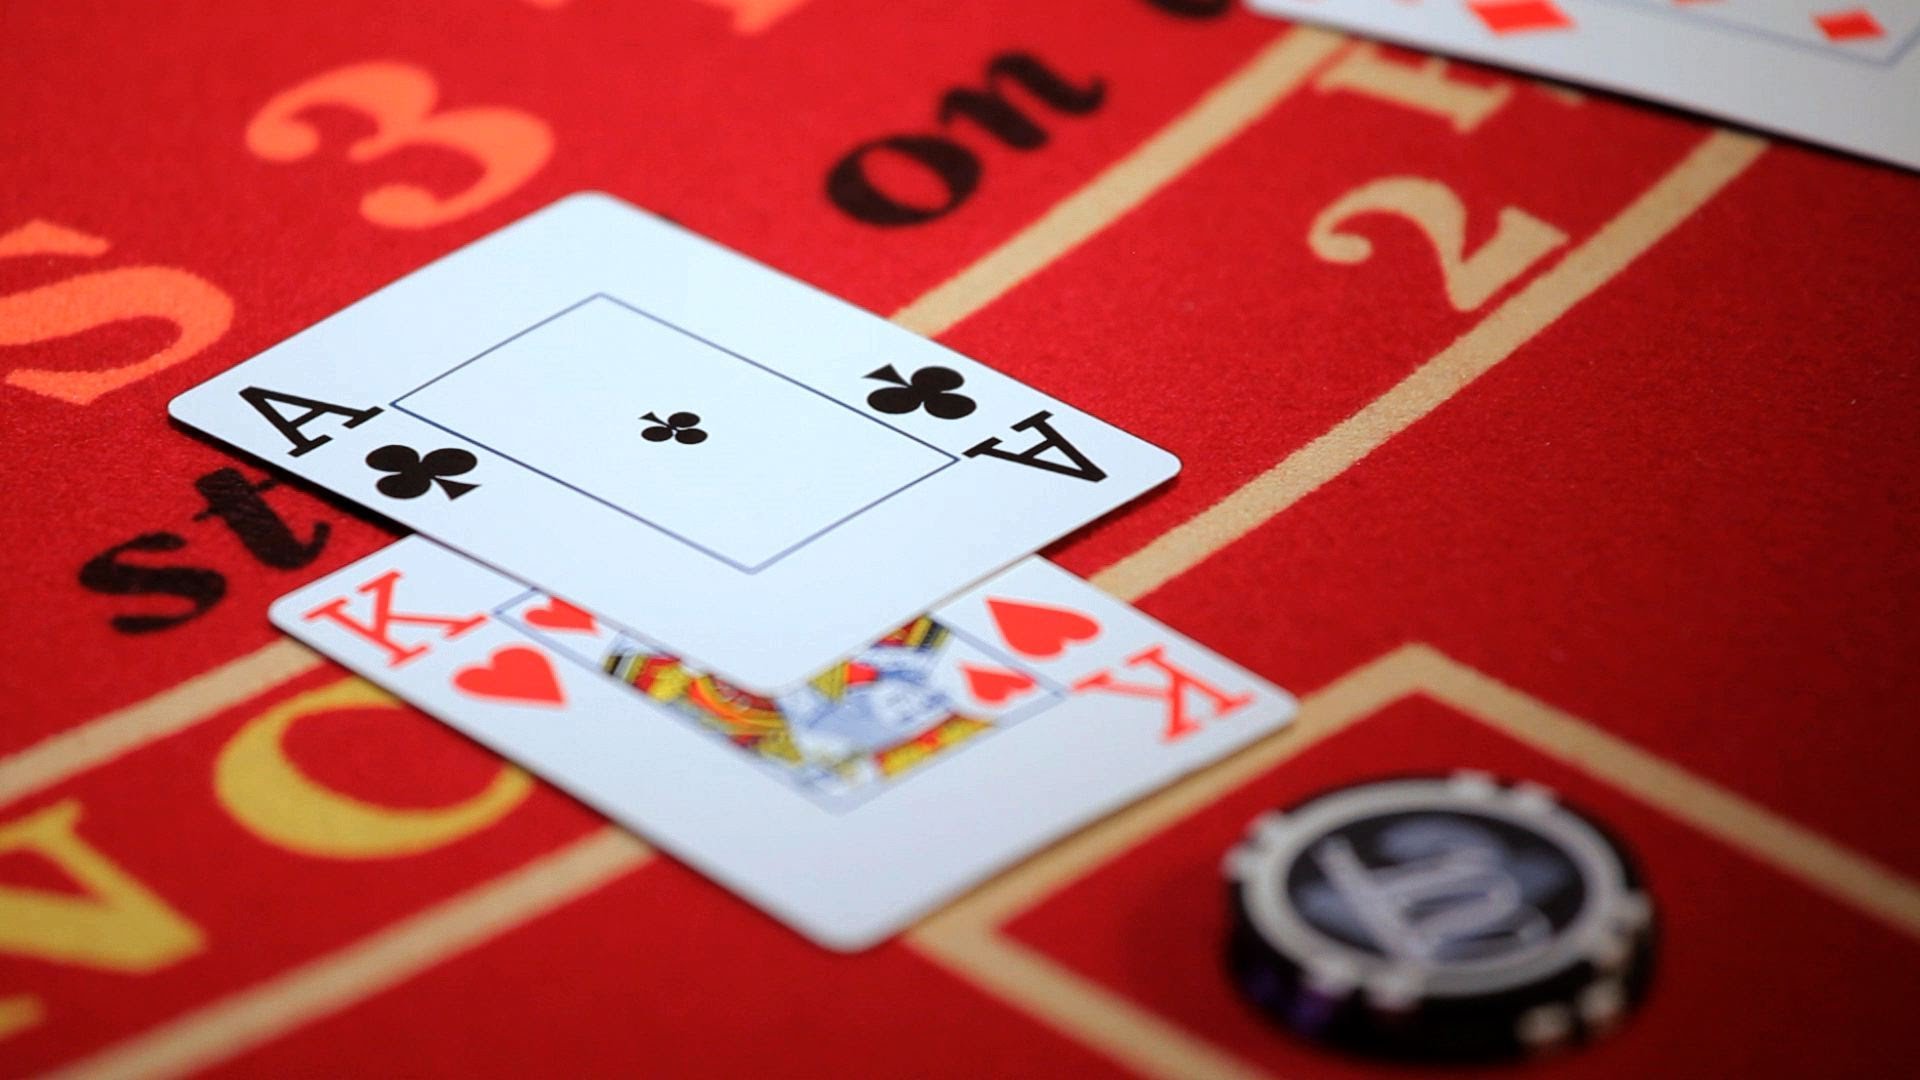 Play Blackjack At Netbet To Double Your Winning